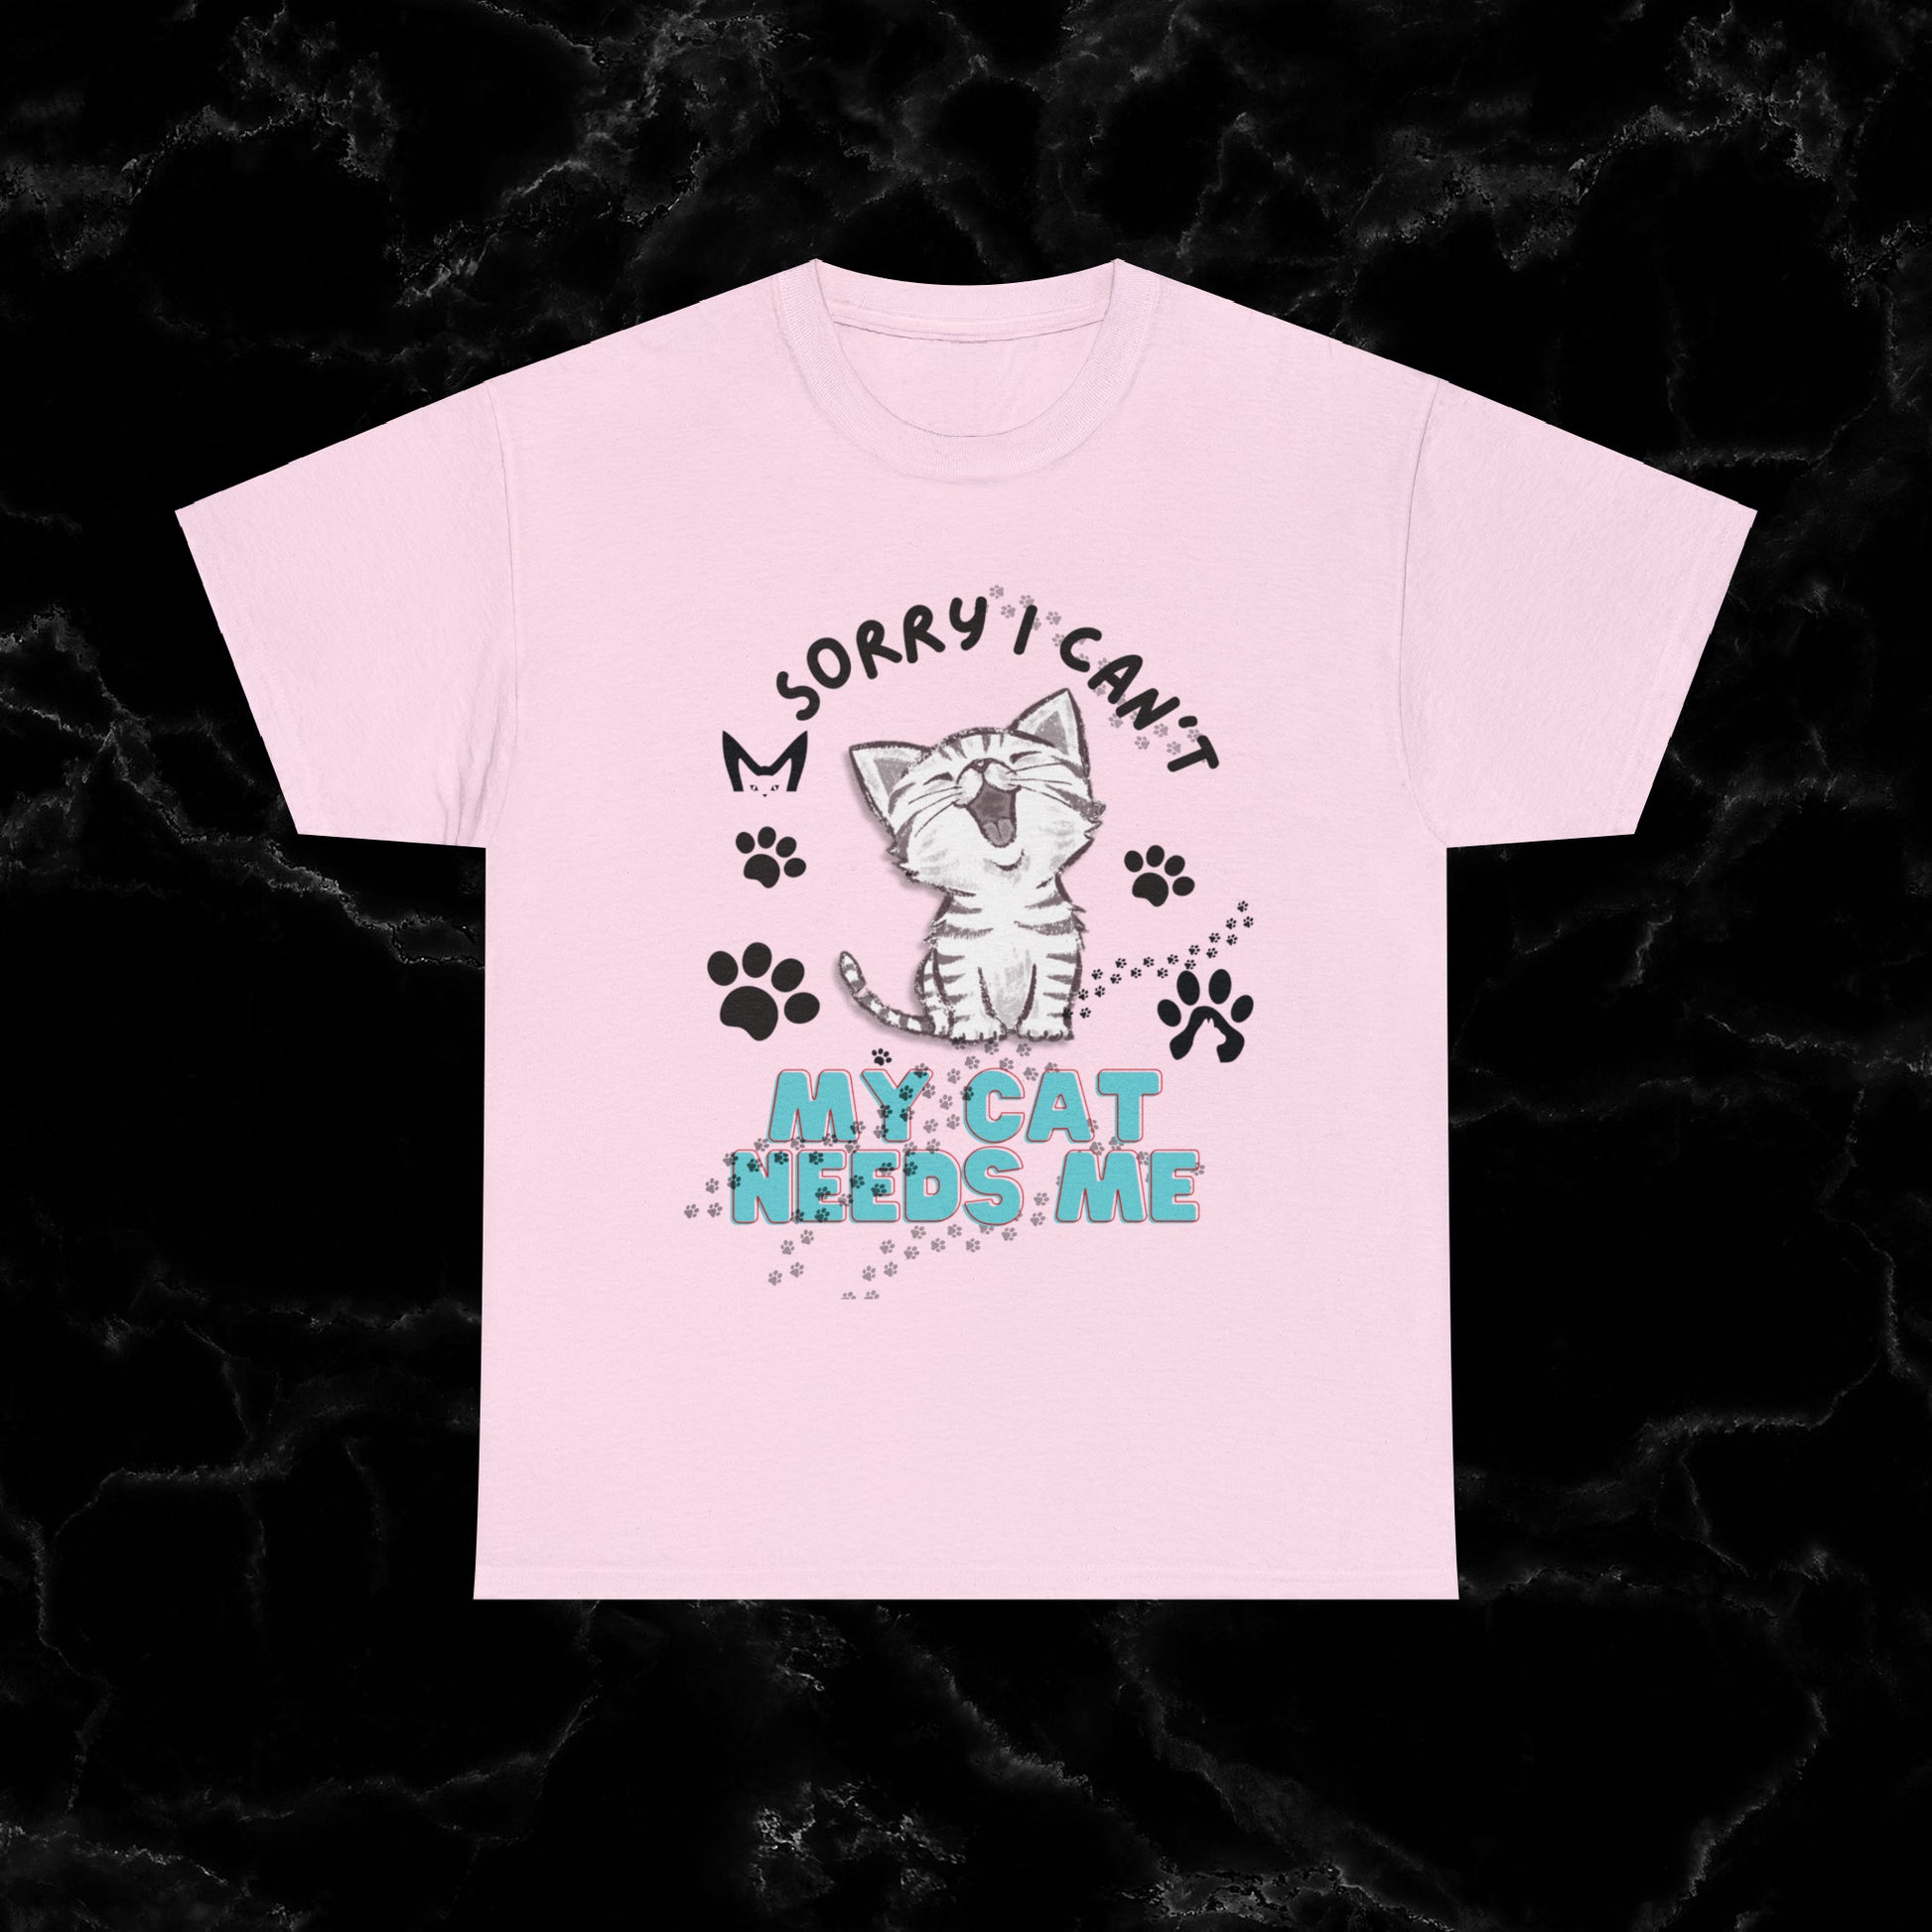 Sorry I Can't, My Cat Needs Me T-Shirt - Perfect Gift for Cat Moms and Animal Lovers T-Shirt Light Pink S 